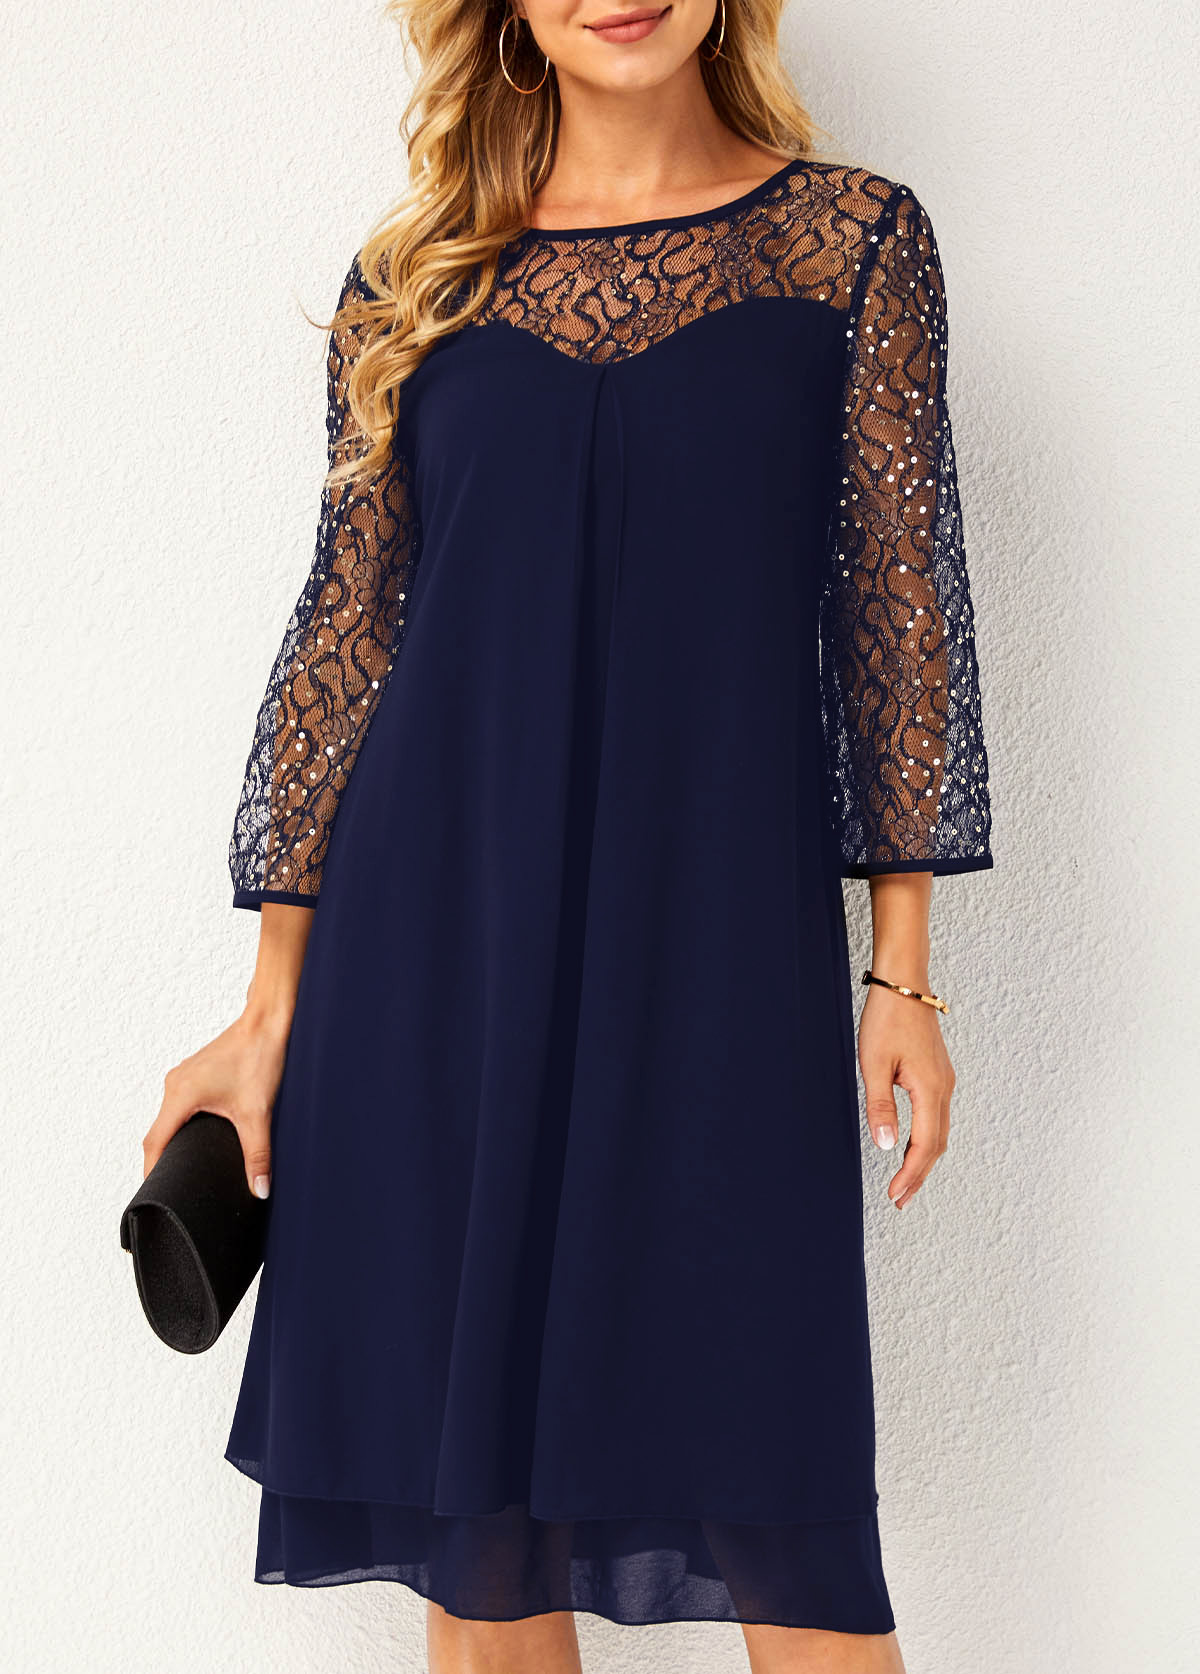 Lace Stitching Navy Blue Sequin Dress